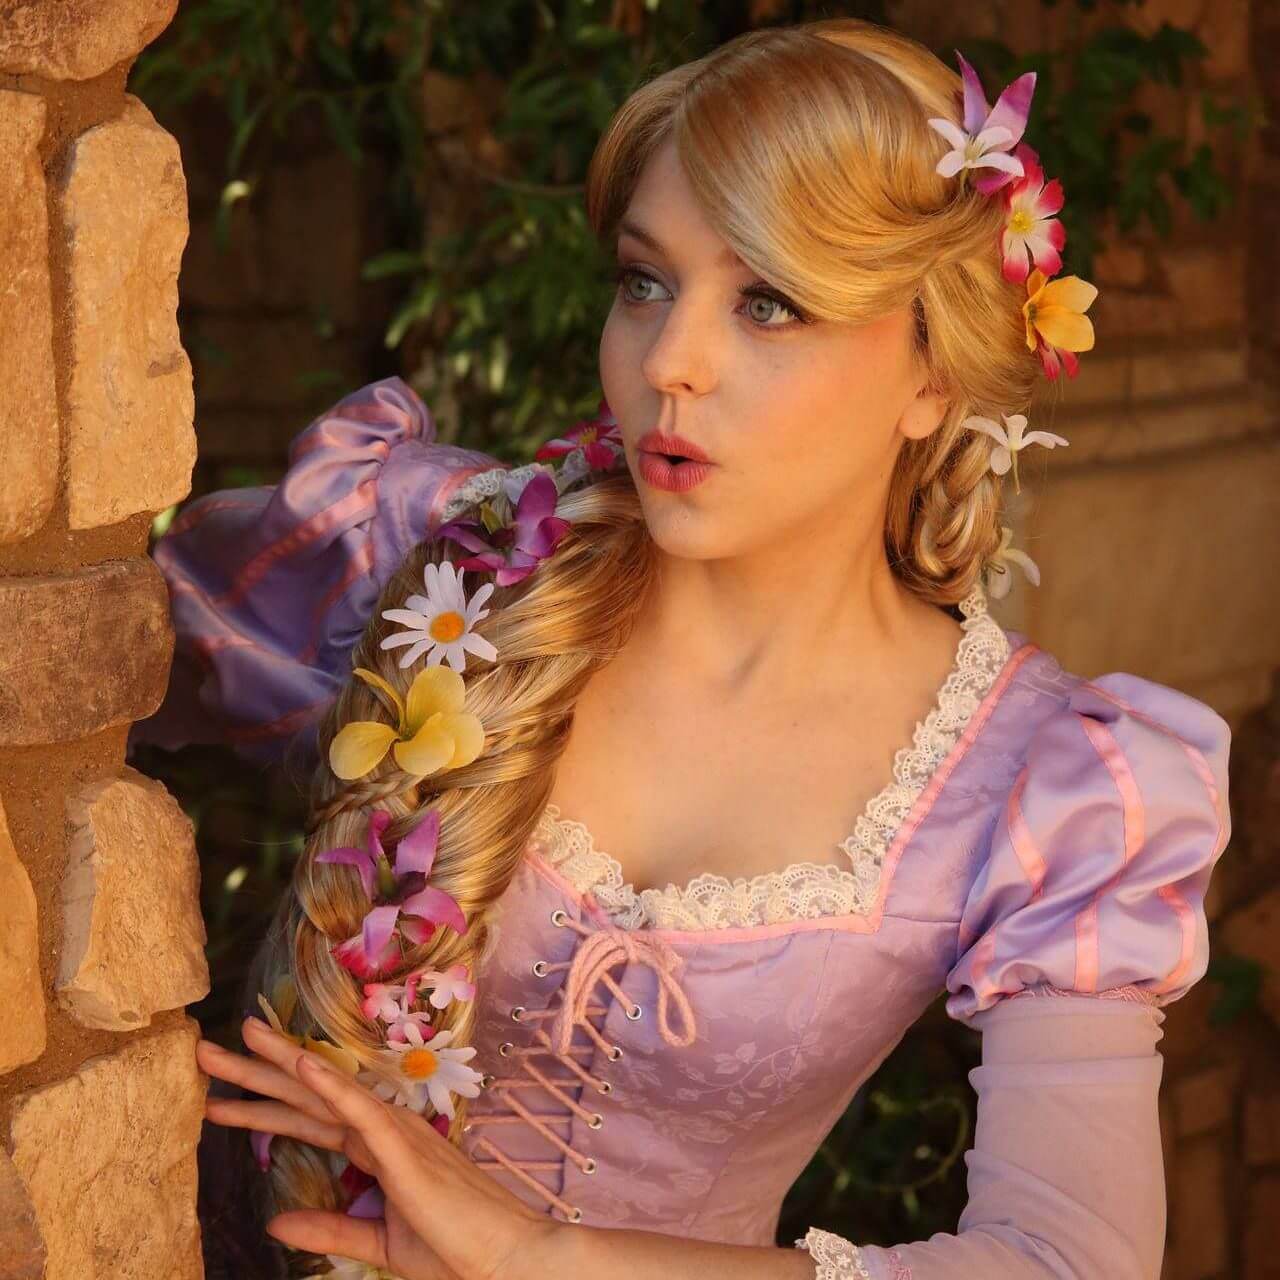 49 Hot Pictures Of Rapunzel Are Really Amazing | Best Of Comic Books